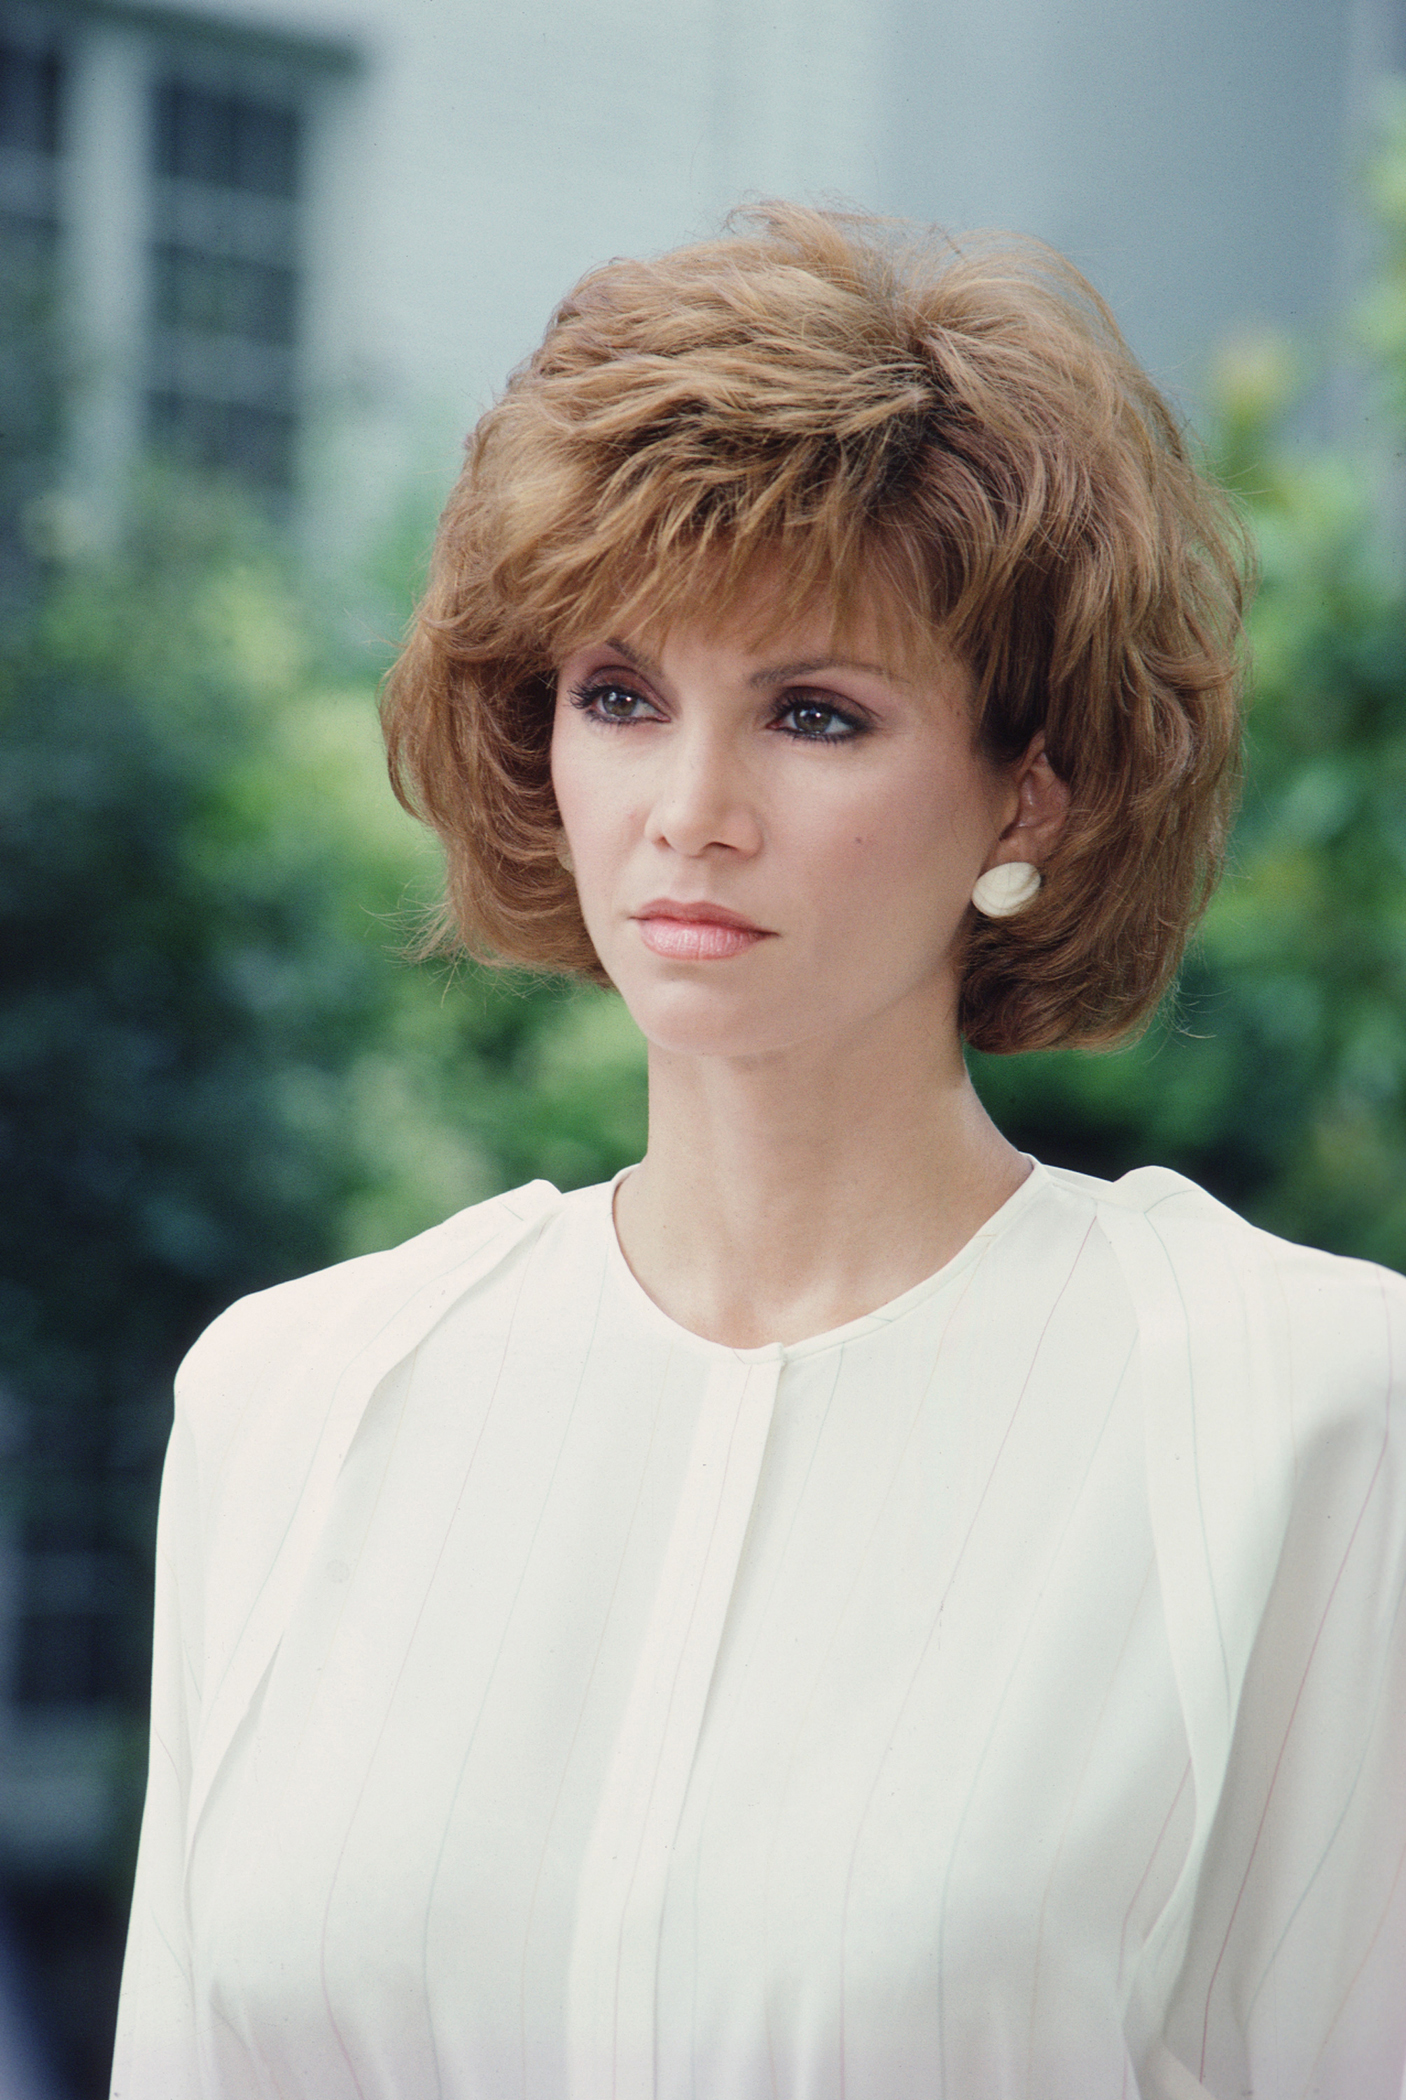 Victoria Principal on the set of "Dallas" on July 1984 | Source: Getty Images